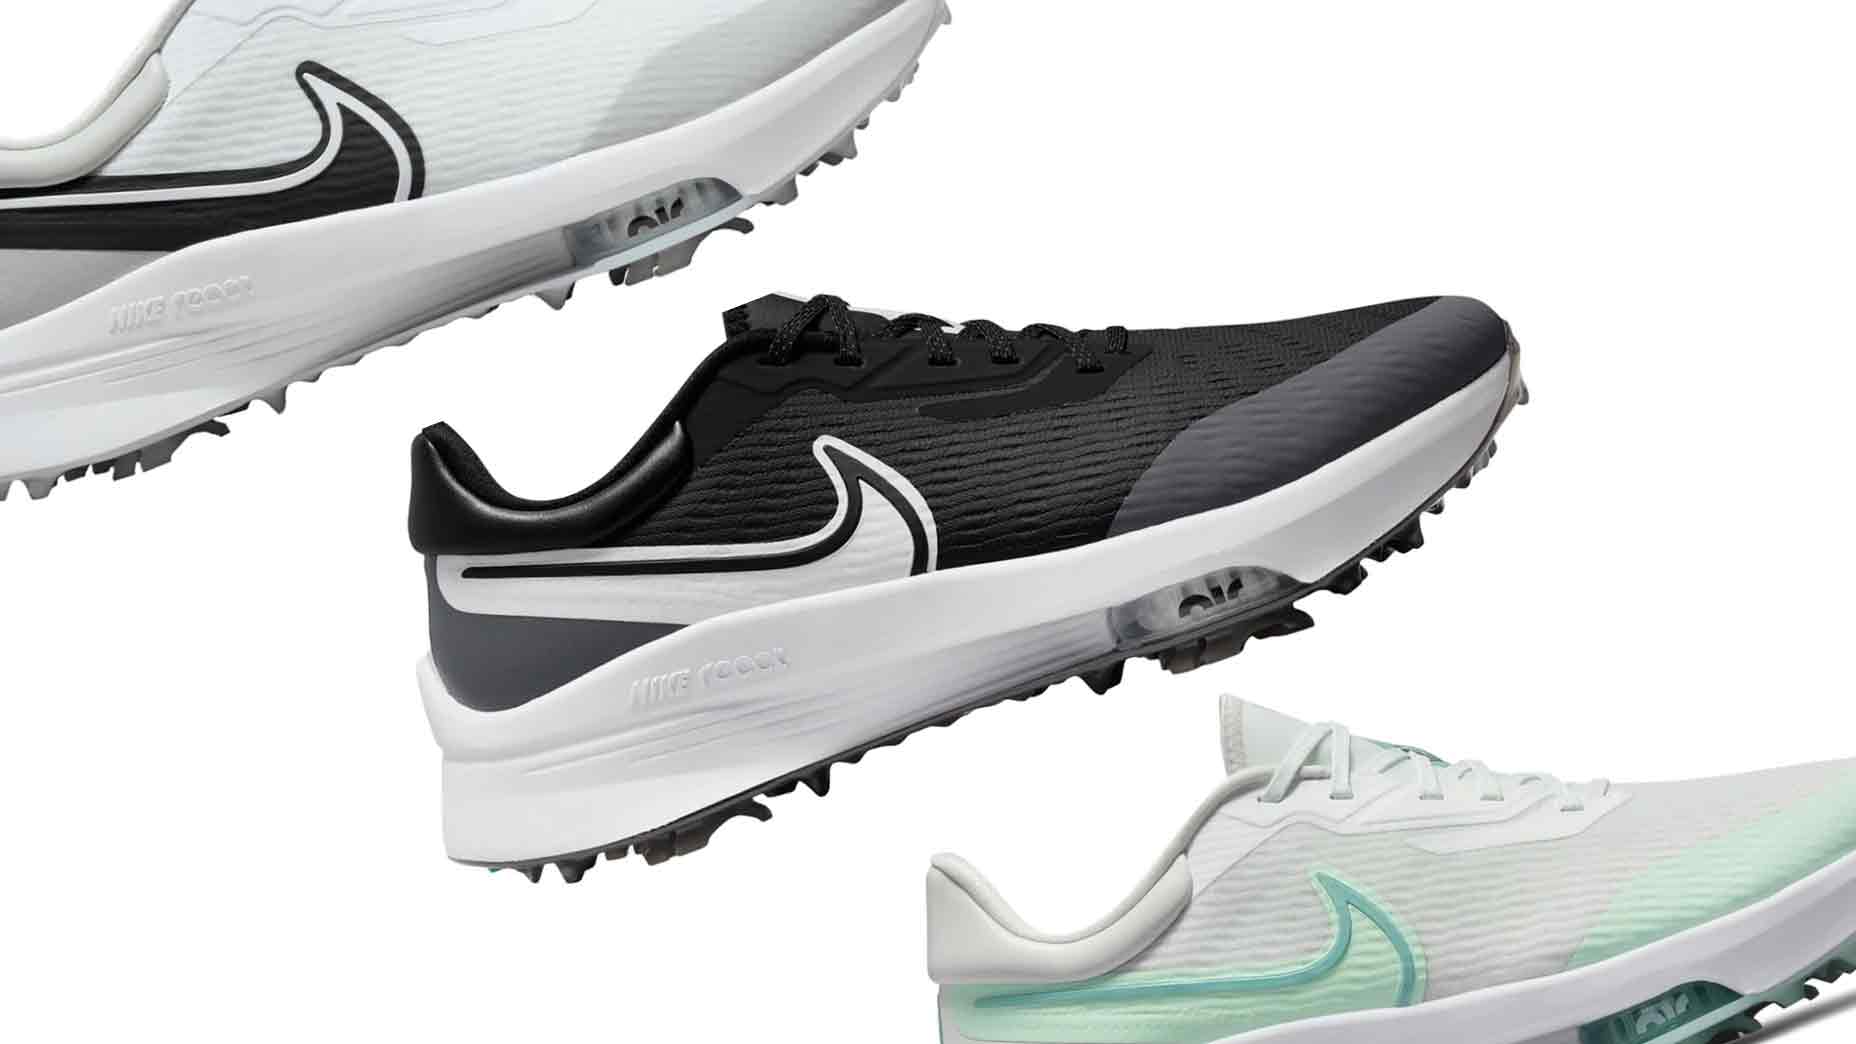 Ontcijferen Melodrama Ringlet Nike golf shoes: This sleek and stylish pair is on sale for a limited time